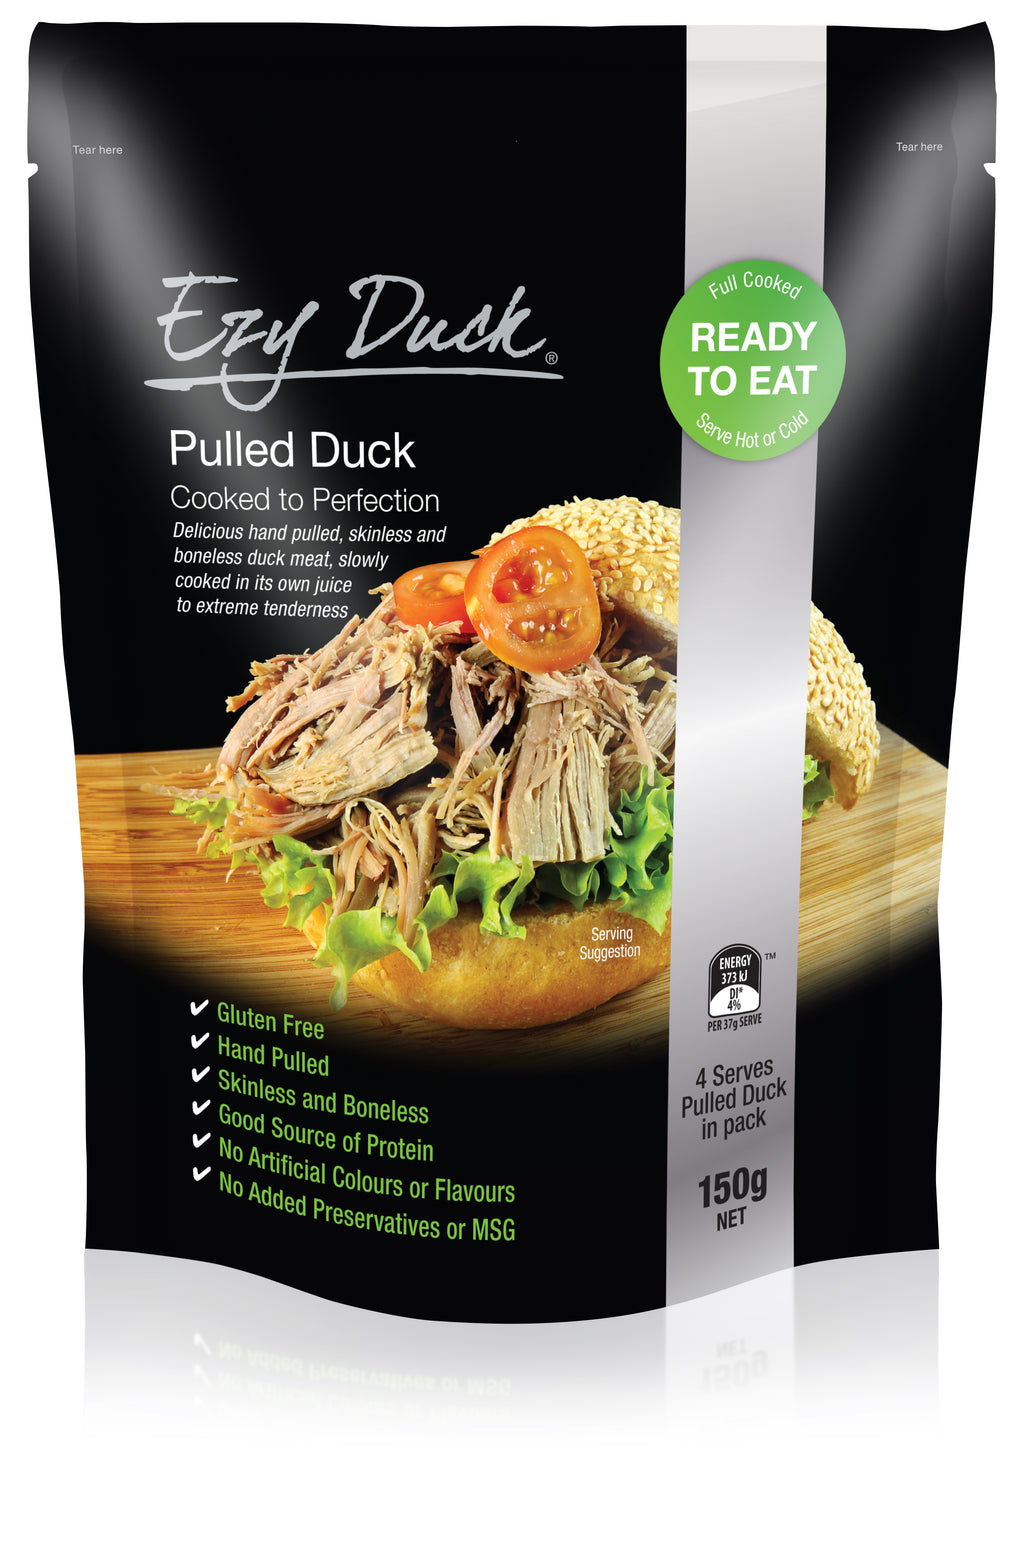 Pulled Duck Meat 150g Pkt Ezy Duck